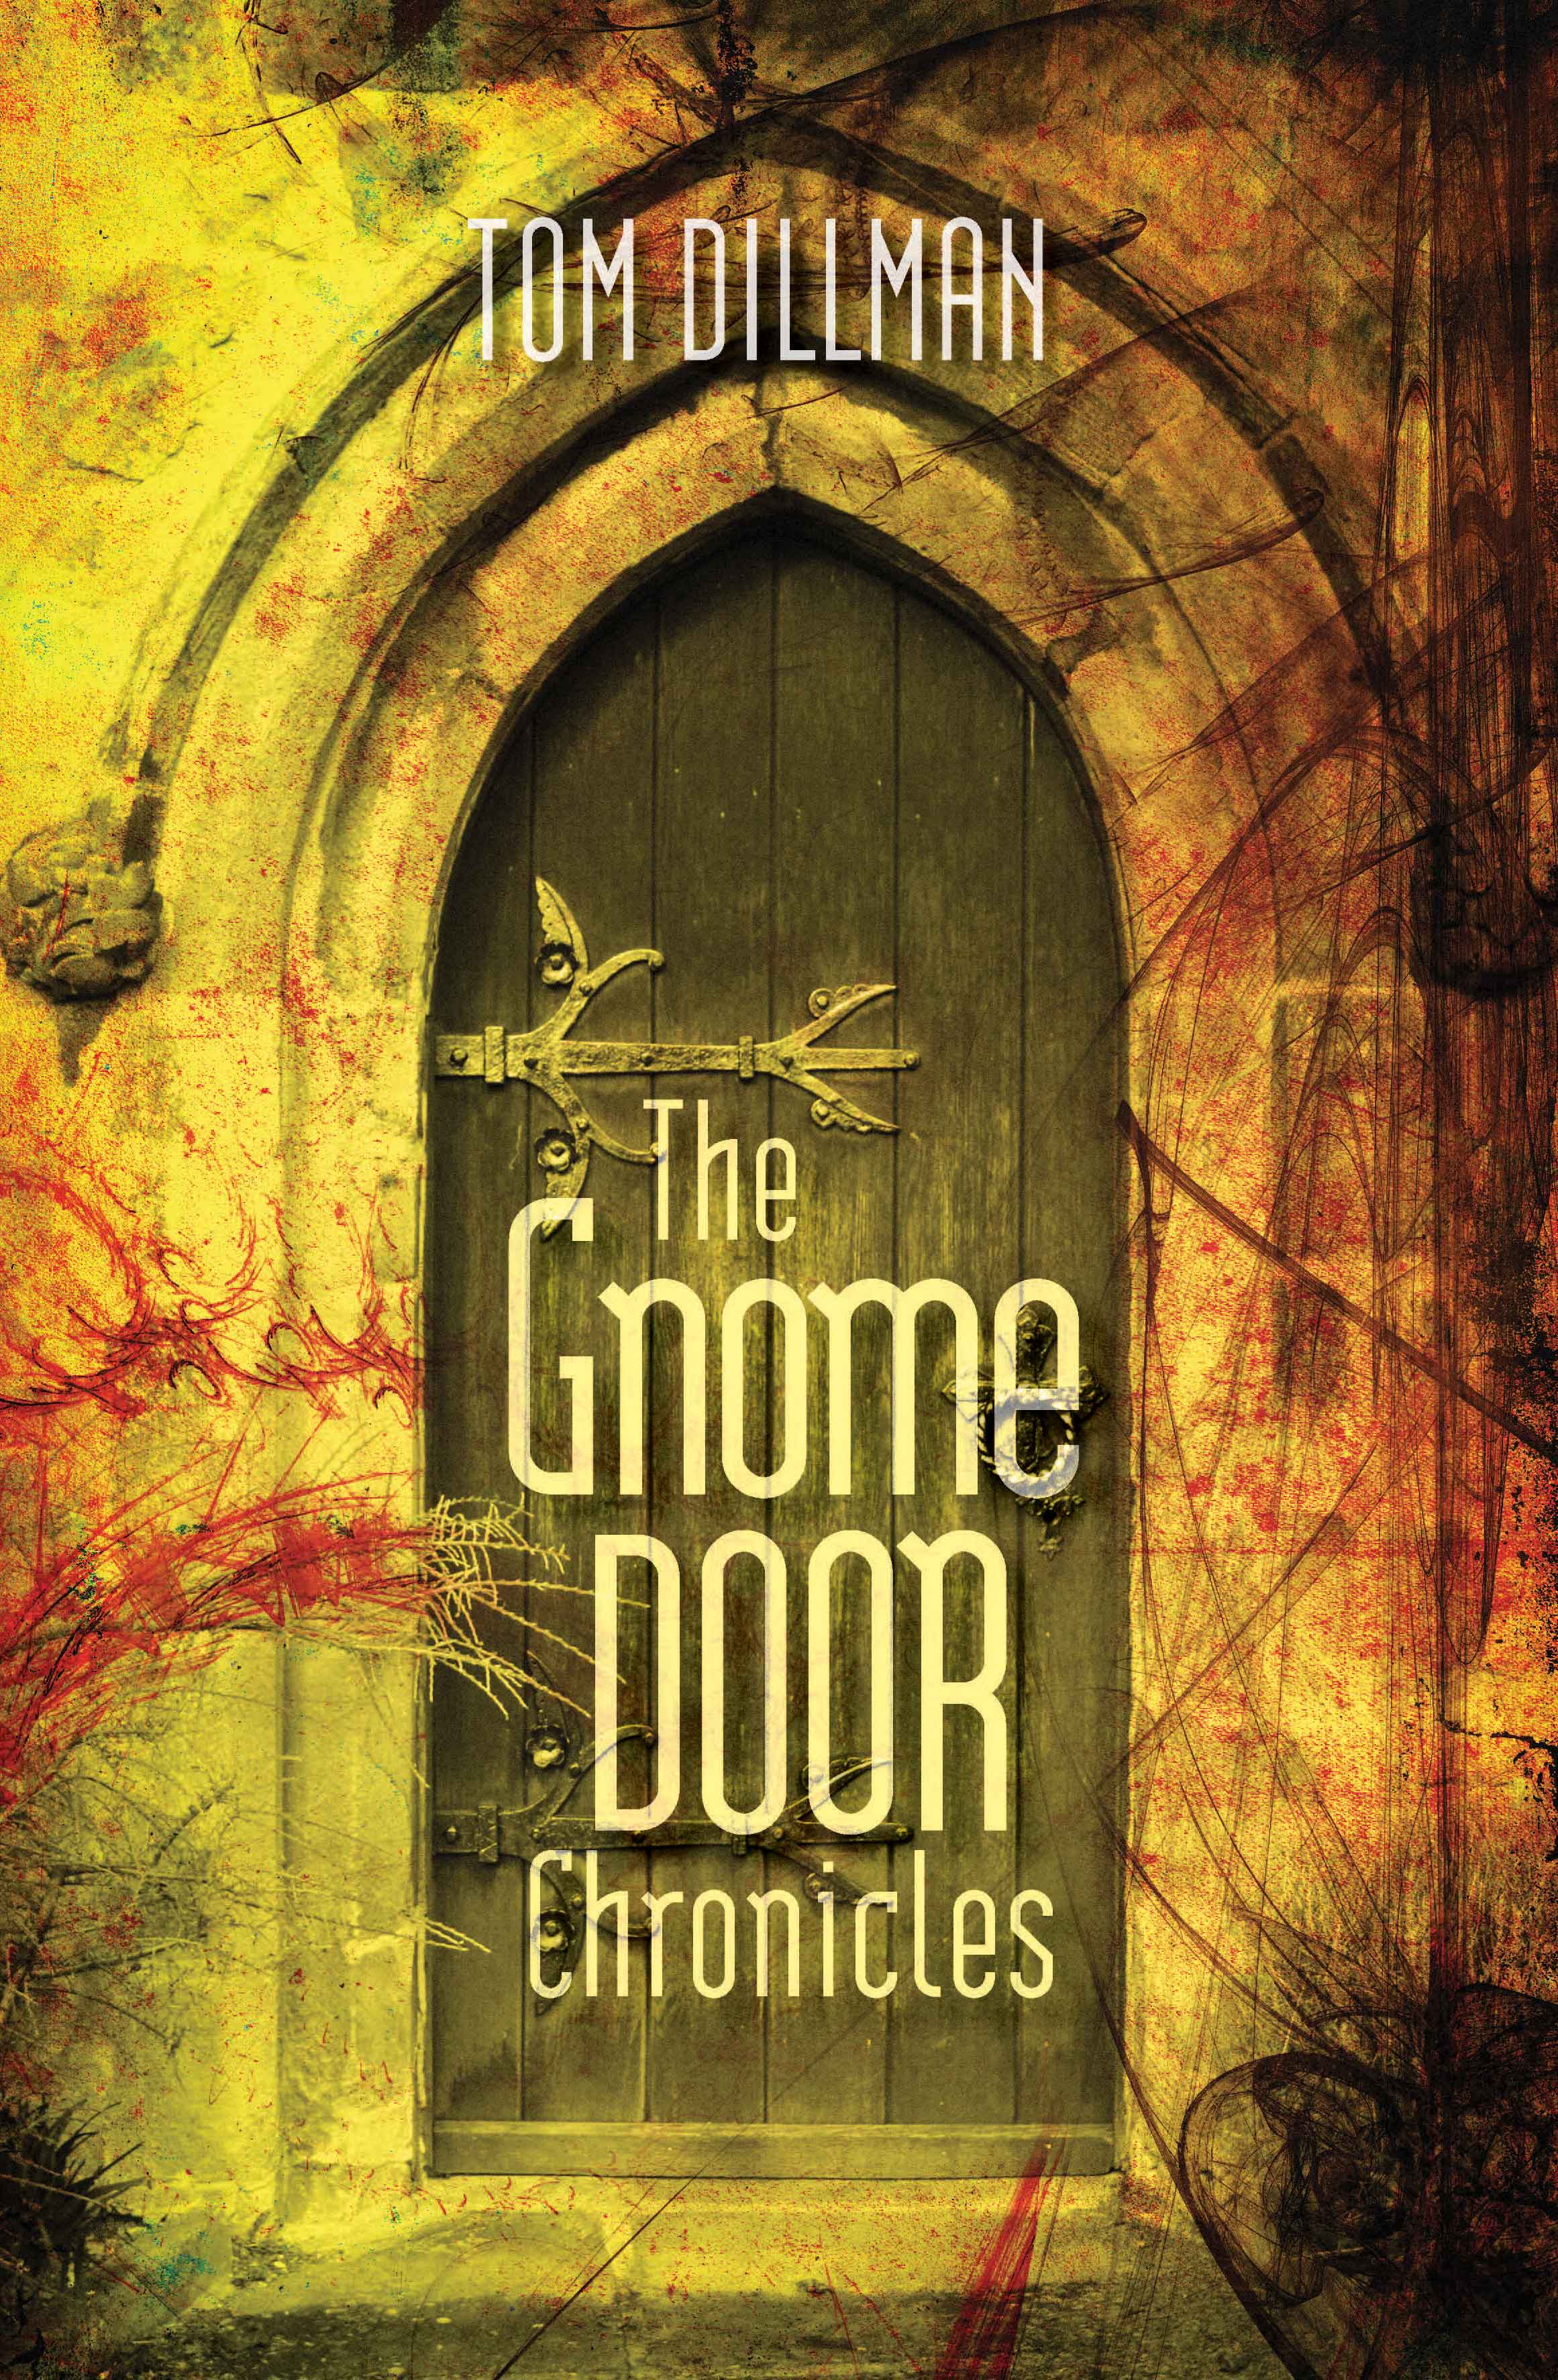 Cover of book The Gnome Door Chronicles.